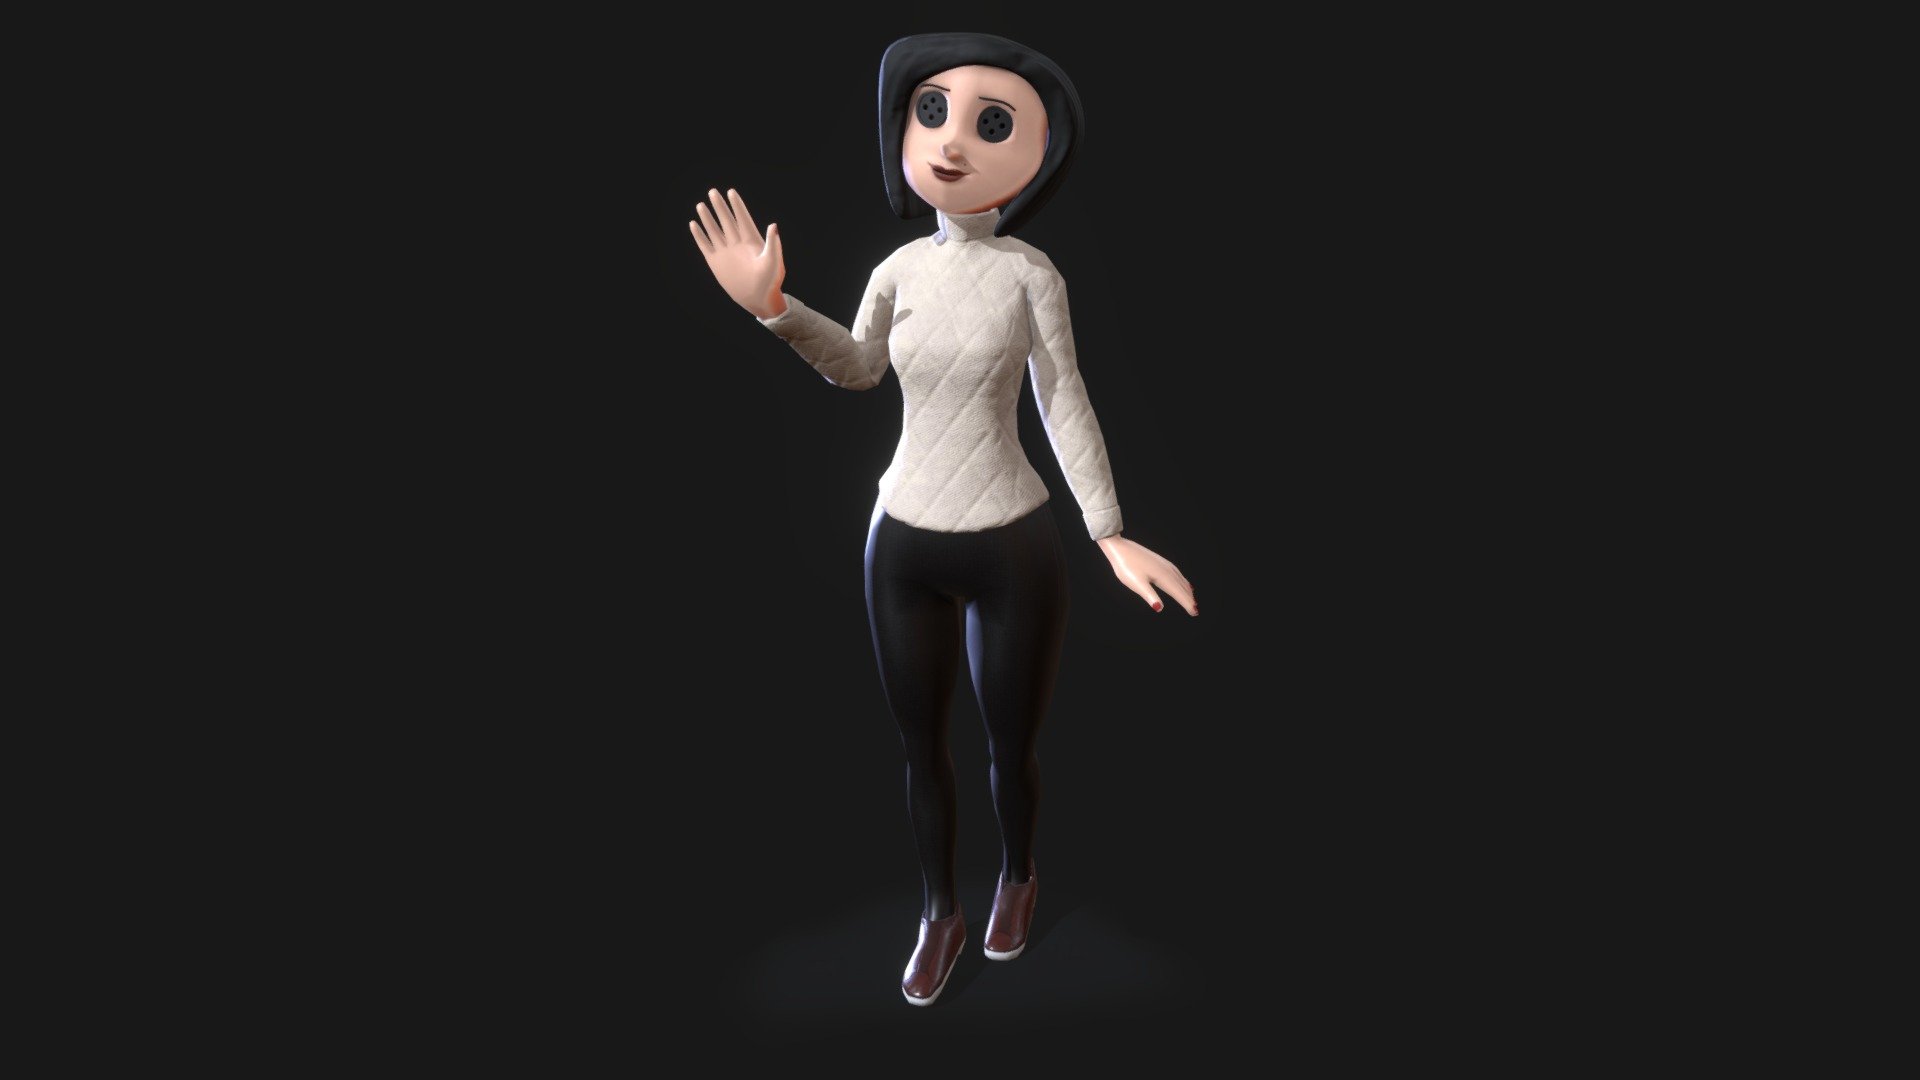 Coraline mother,  turned out well.
Model made in blender, textures in subpainter.
http://coraline.wikia.com/wiki/Beldam_(Other_Mother) - Other mother - Coraline - 3D model by H3SYR (@ongezell) 3d model